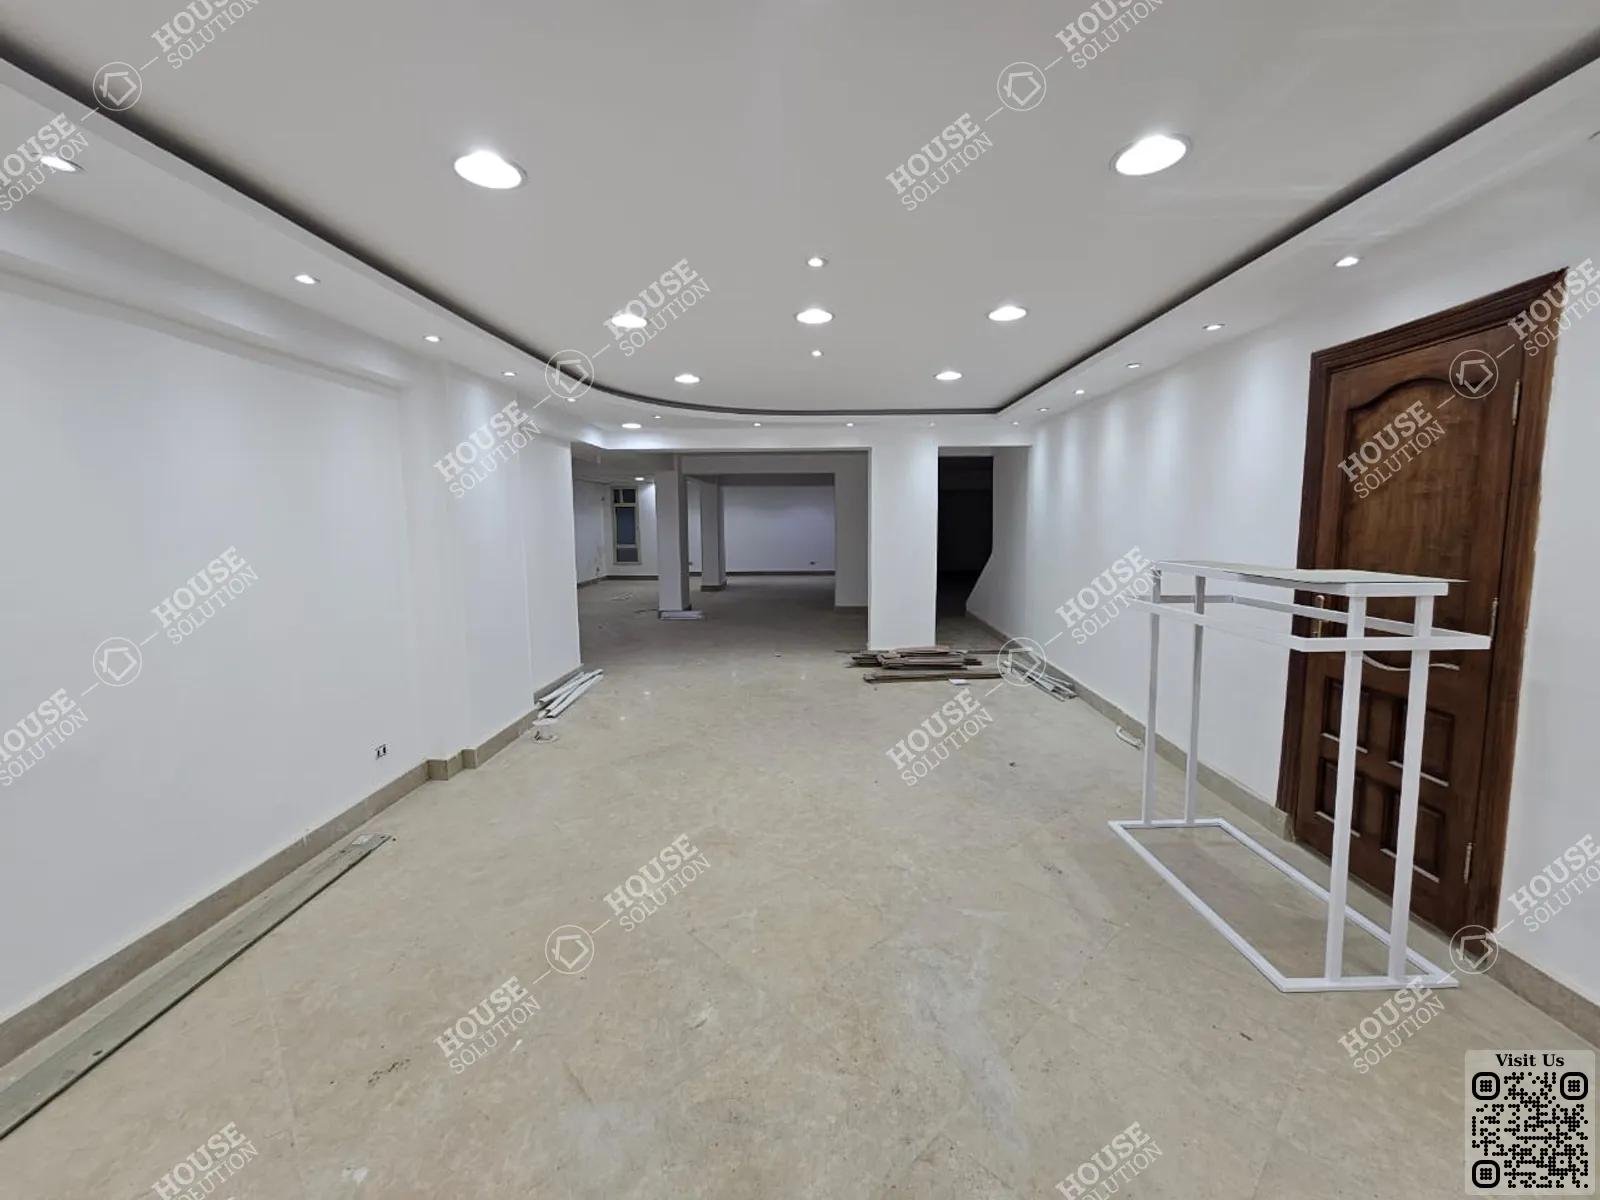 RECEPTION  @ Office spaces For Rent In Maadi Maadi Degla Area: 300 m² consists of 3 Bedrooms 1 Bathrooms Unfurnished 5 stars #5854-2